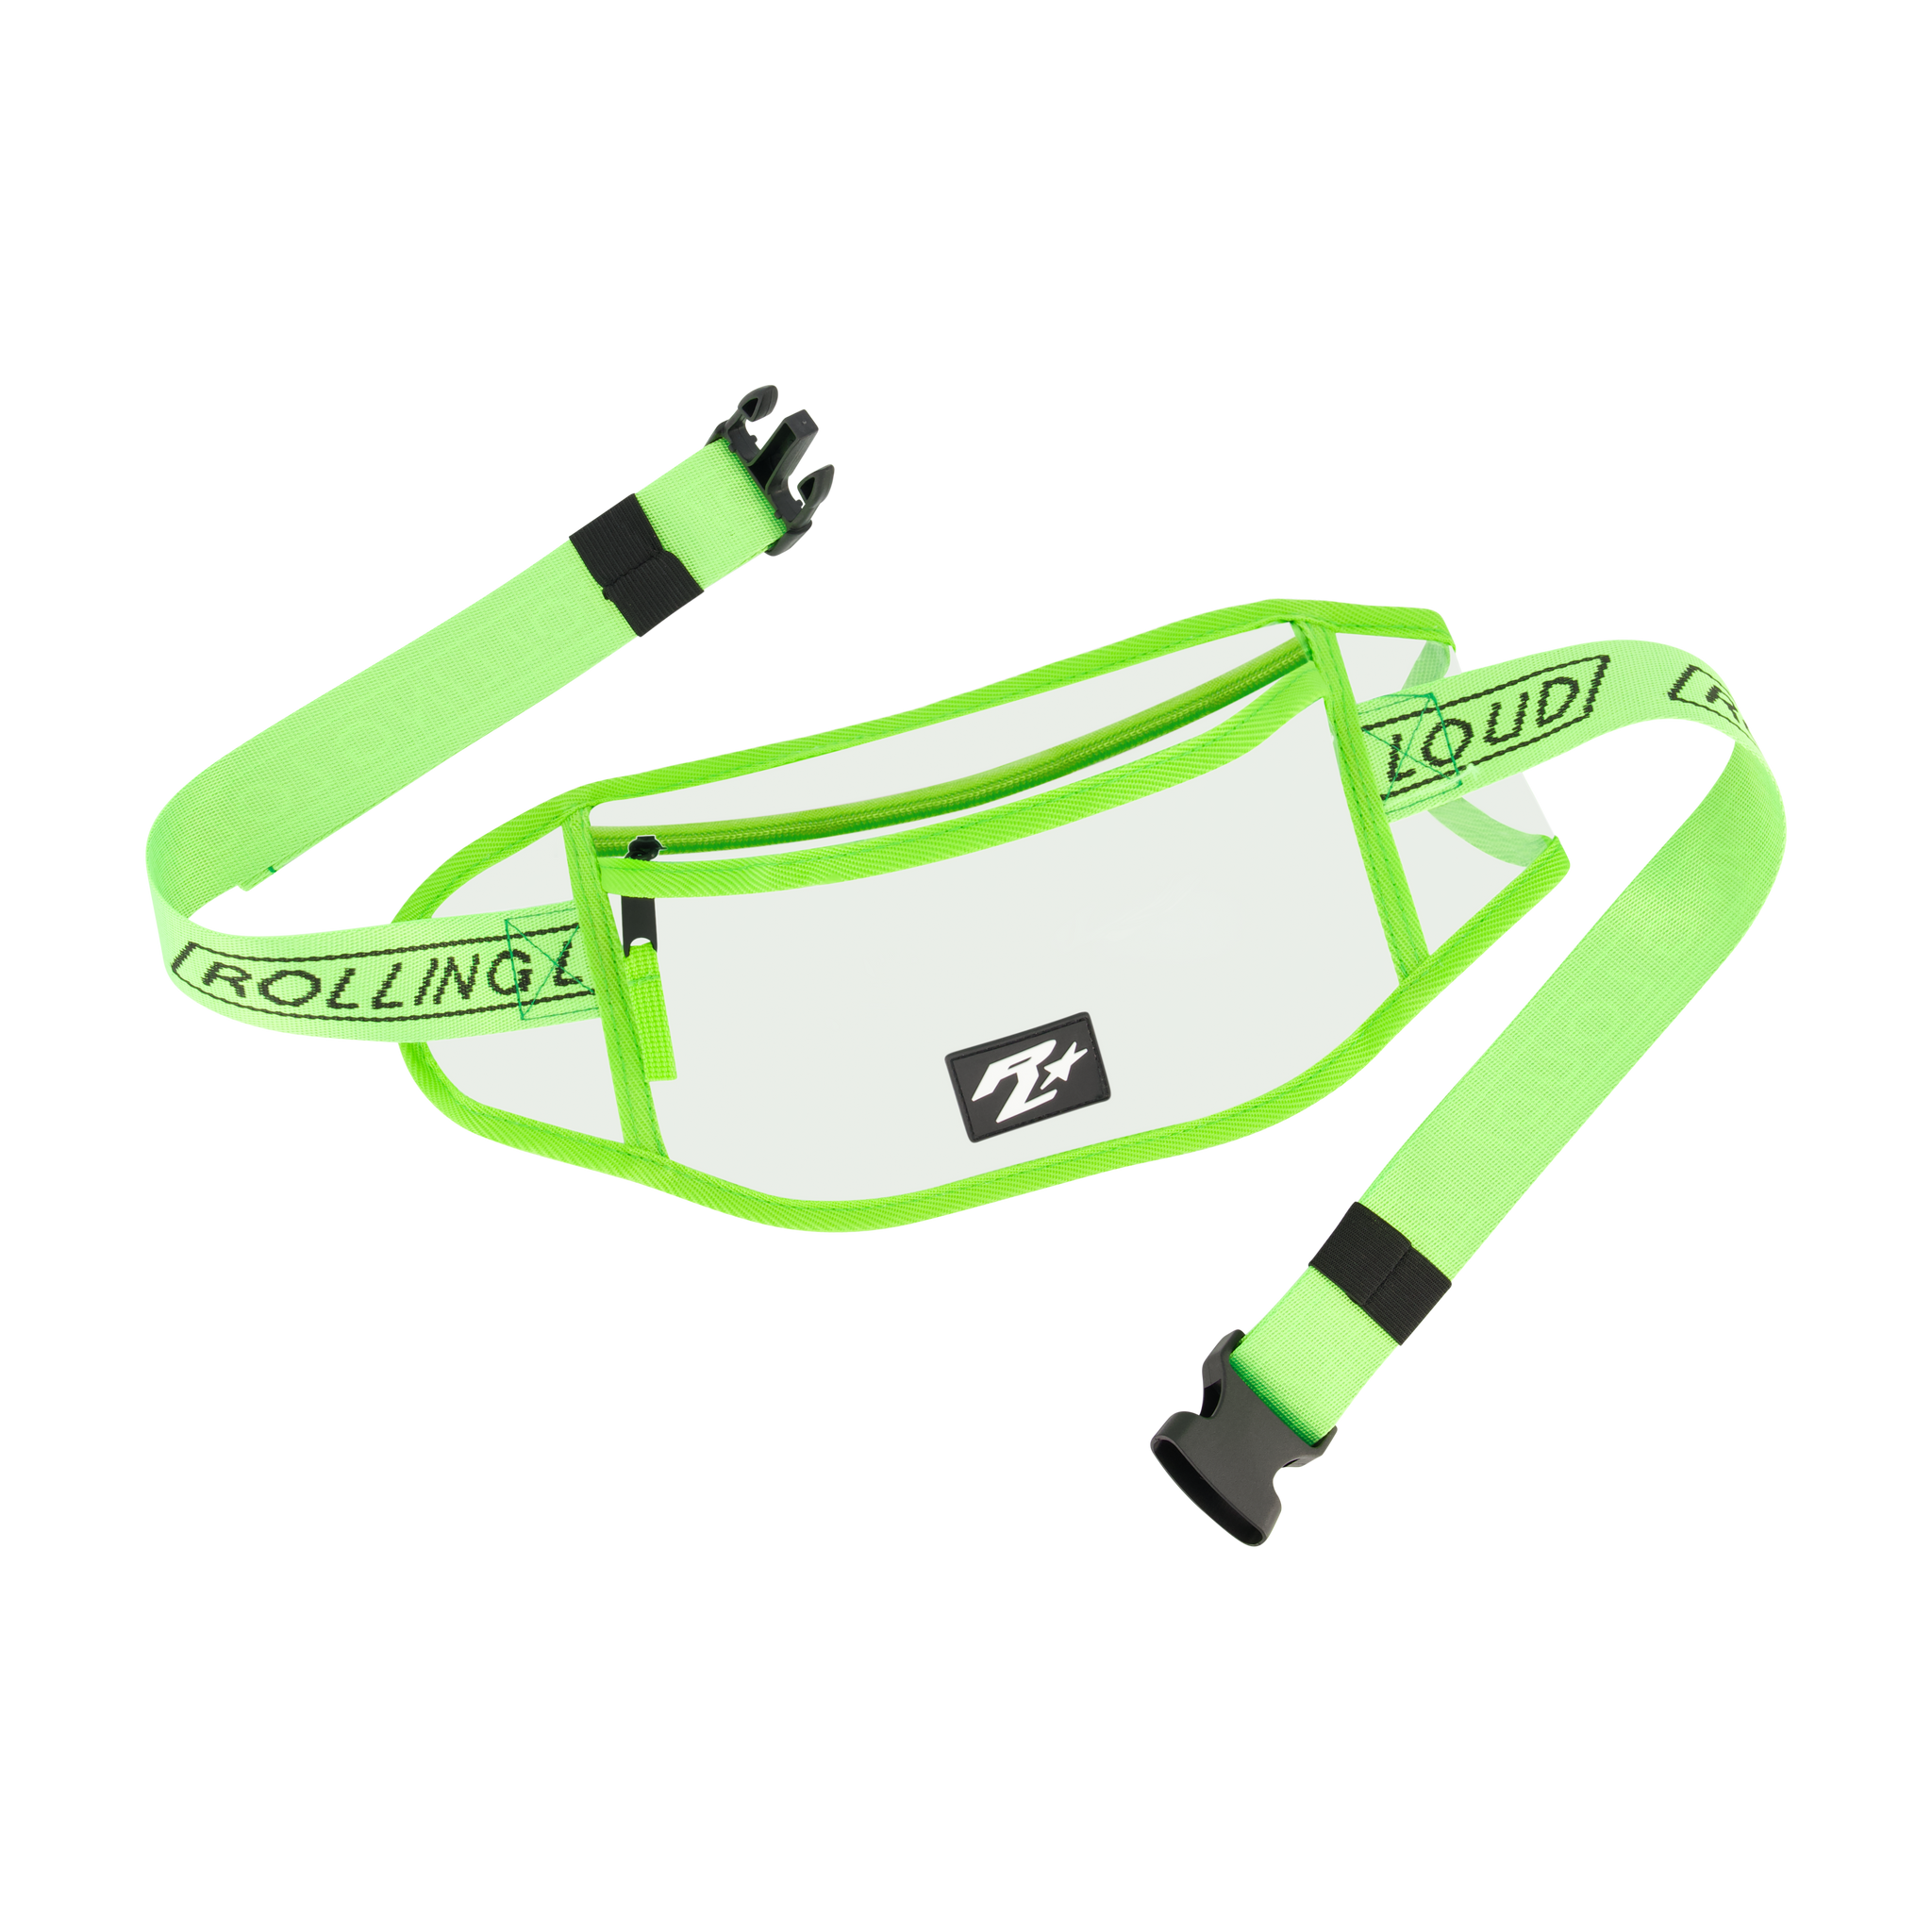 RL Green Clear Fanny Pack - Festival Approved